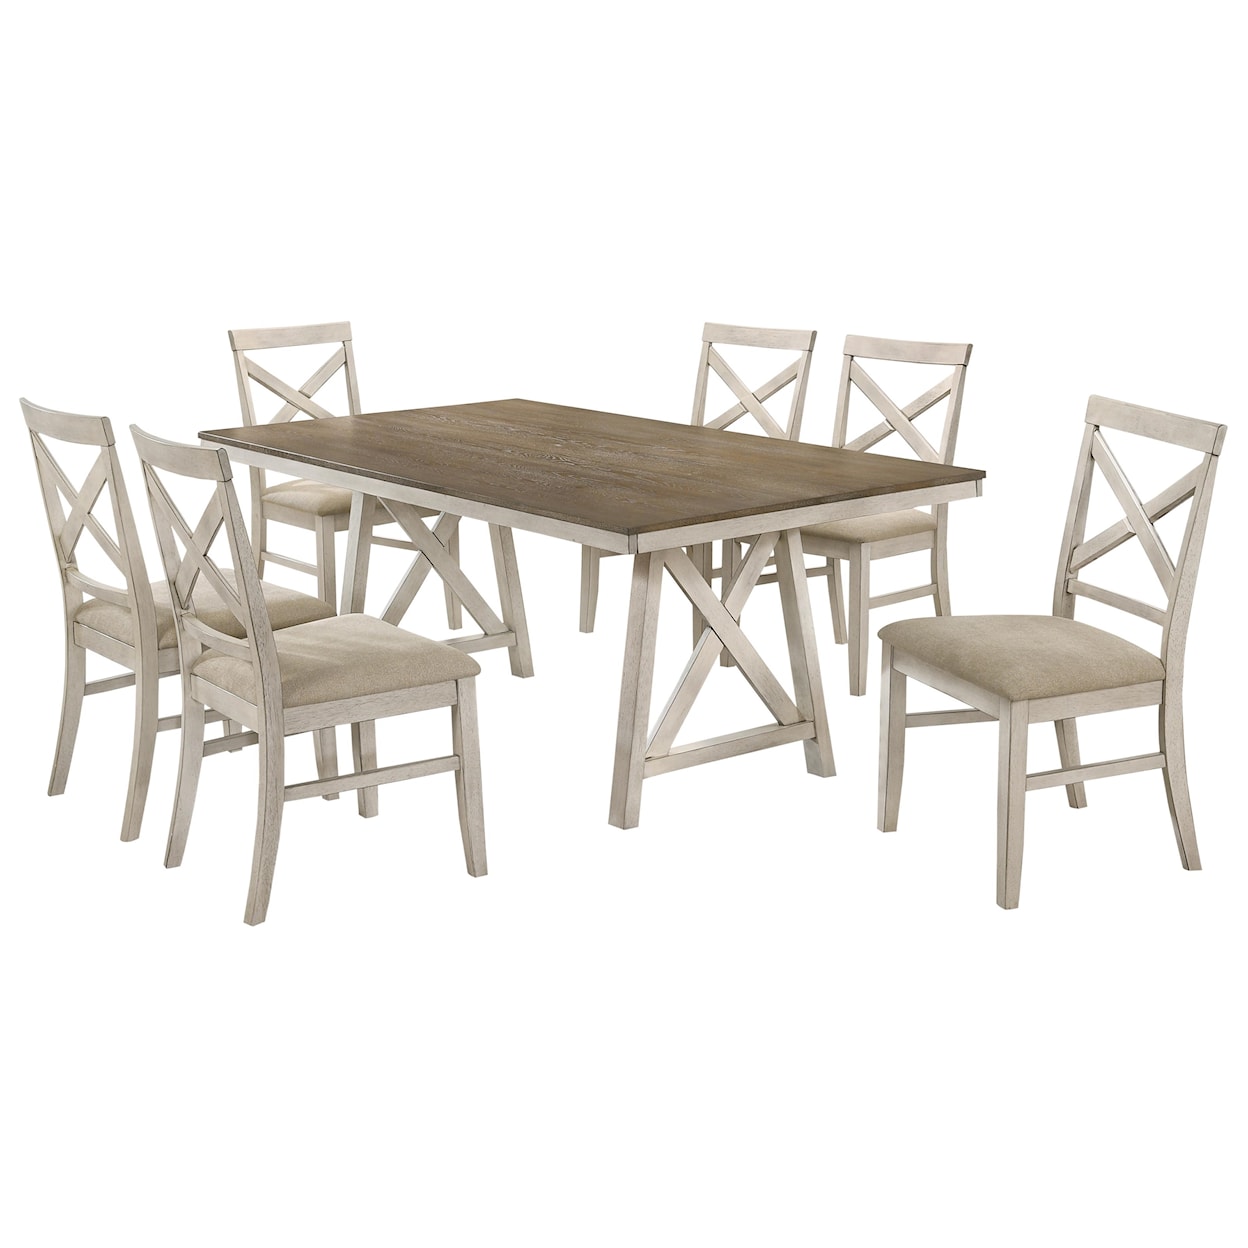 Lacey Furniture Somerset Dining Table with Six Chairs